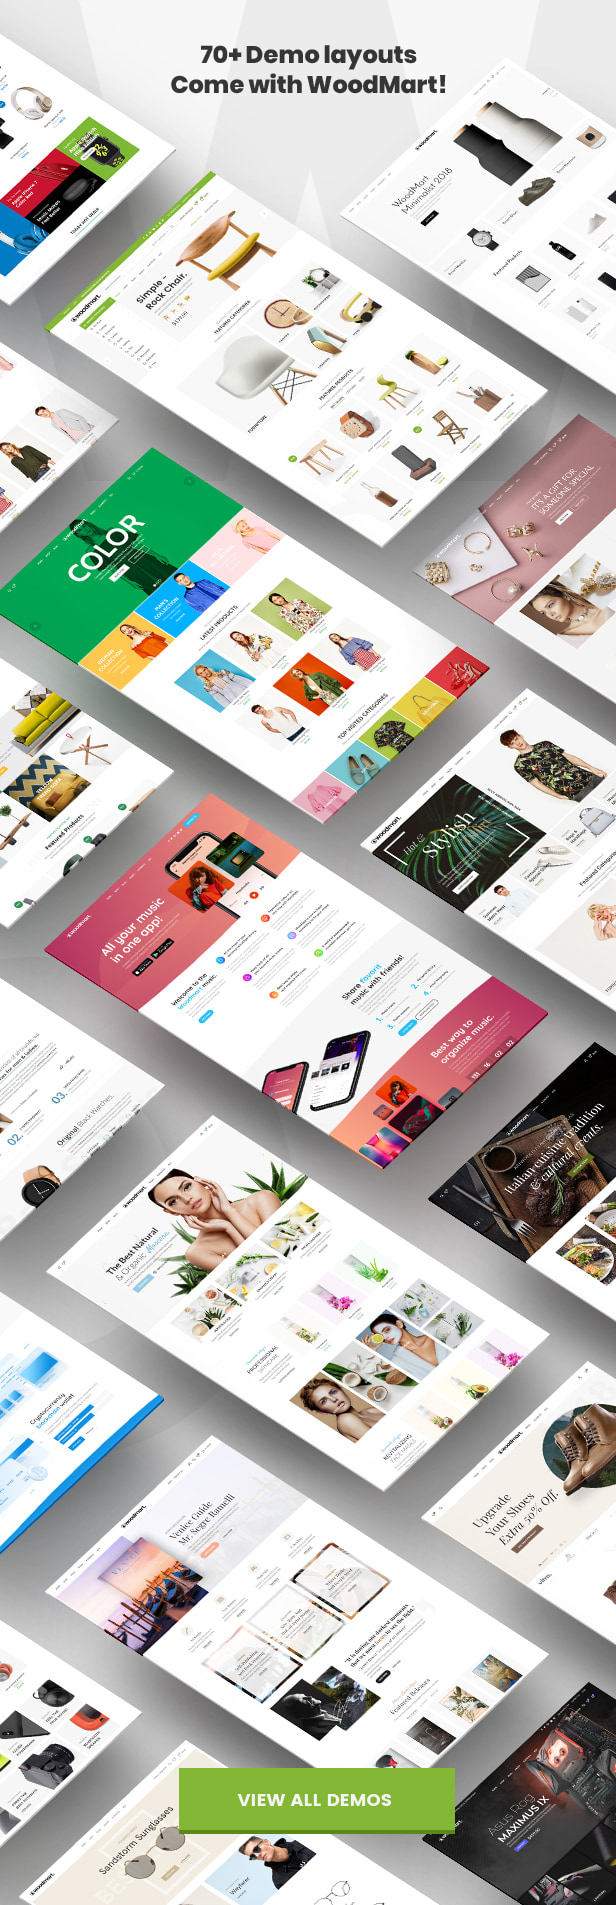 WoodMart v6.3.3 Online Store Template - layouts